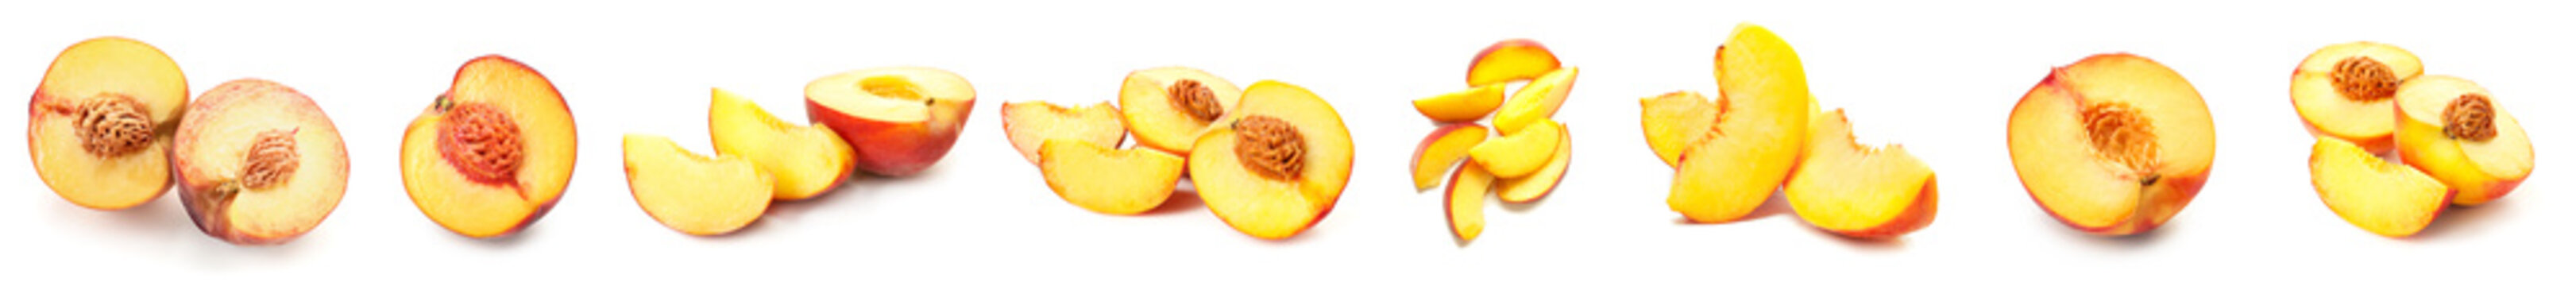 Set of ripe cut peaches isolated on white